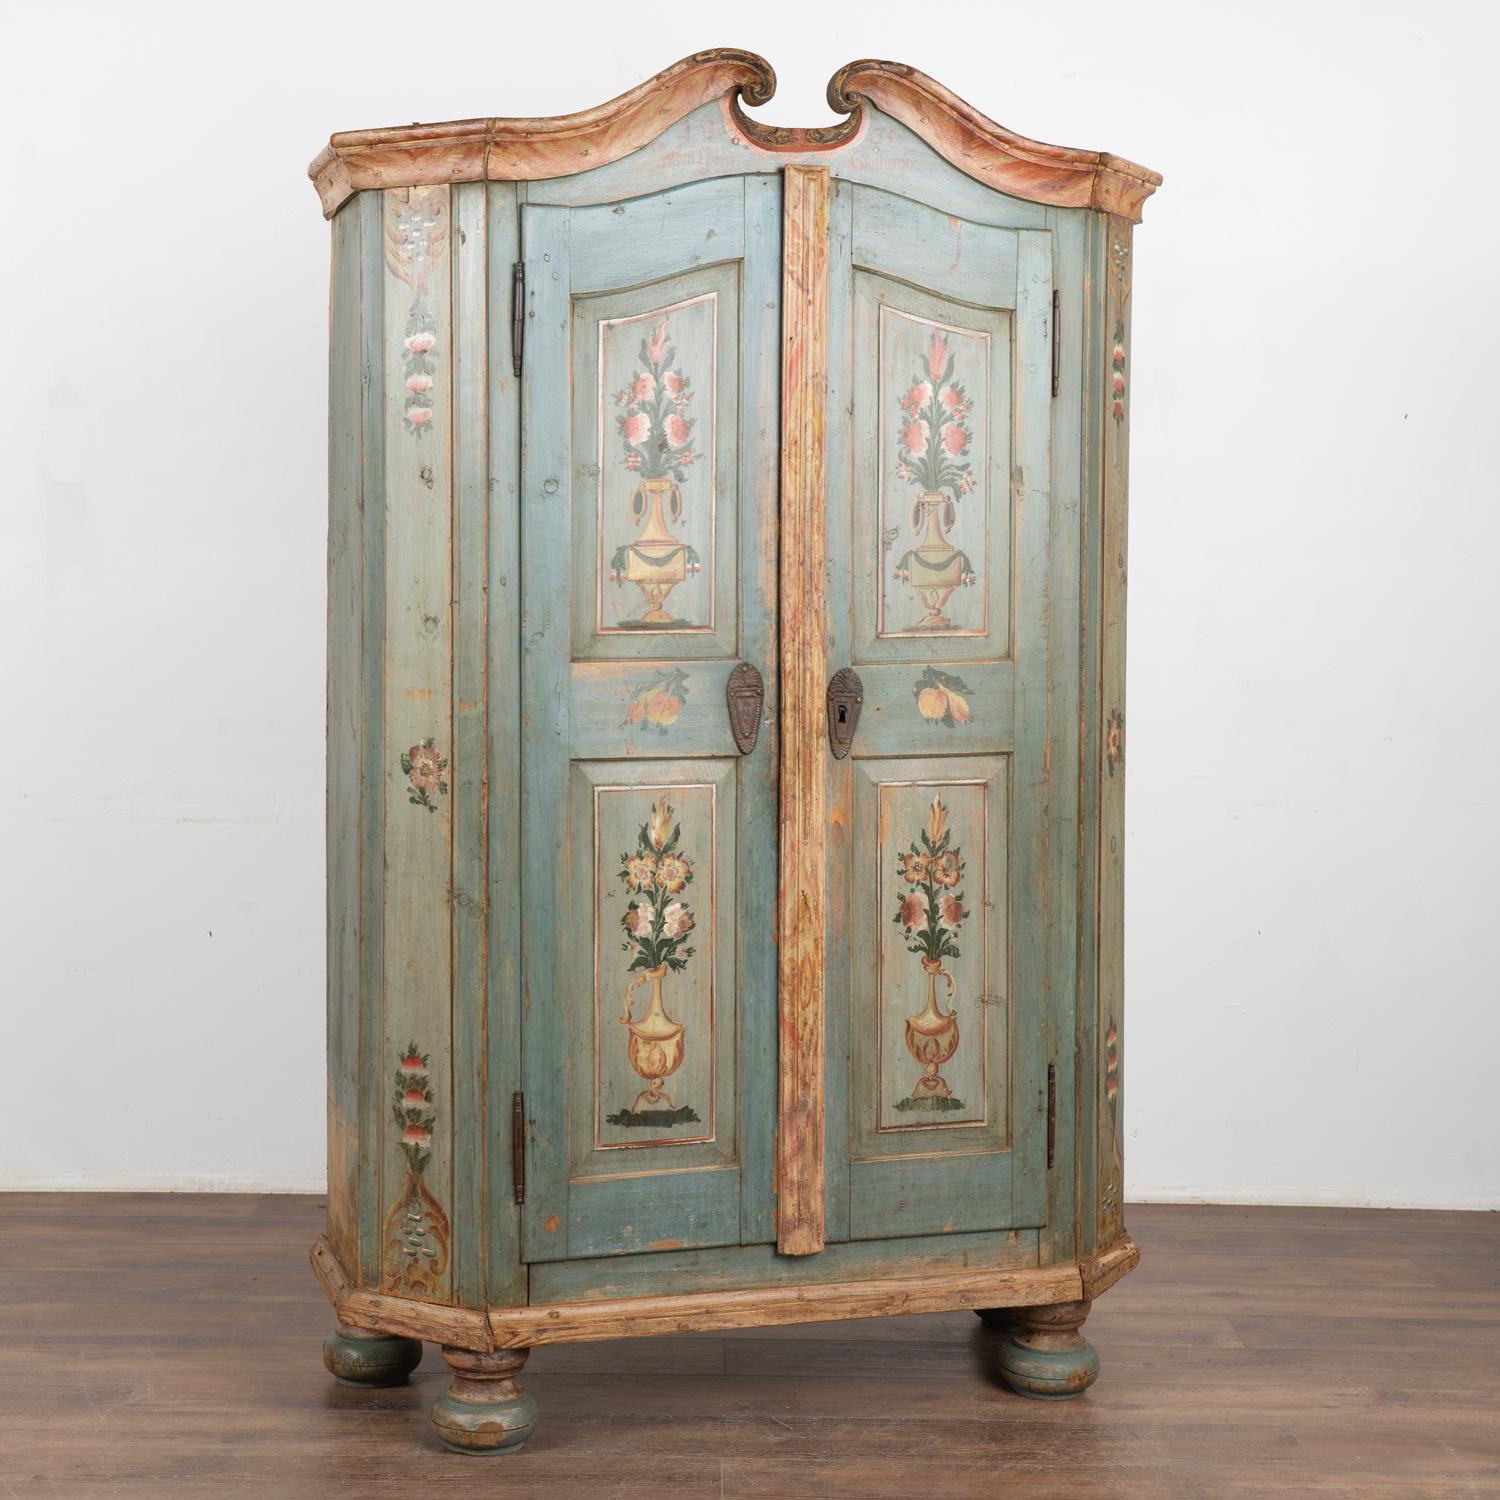 This delightful painted pine armoire still maintains the quality and details of the original hand-painted finish with background tones of soft blue and teal.
Note in the crown/bonnet the date of 1835 with names underneath.
Notice the 4 panels of